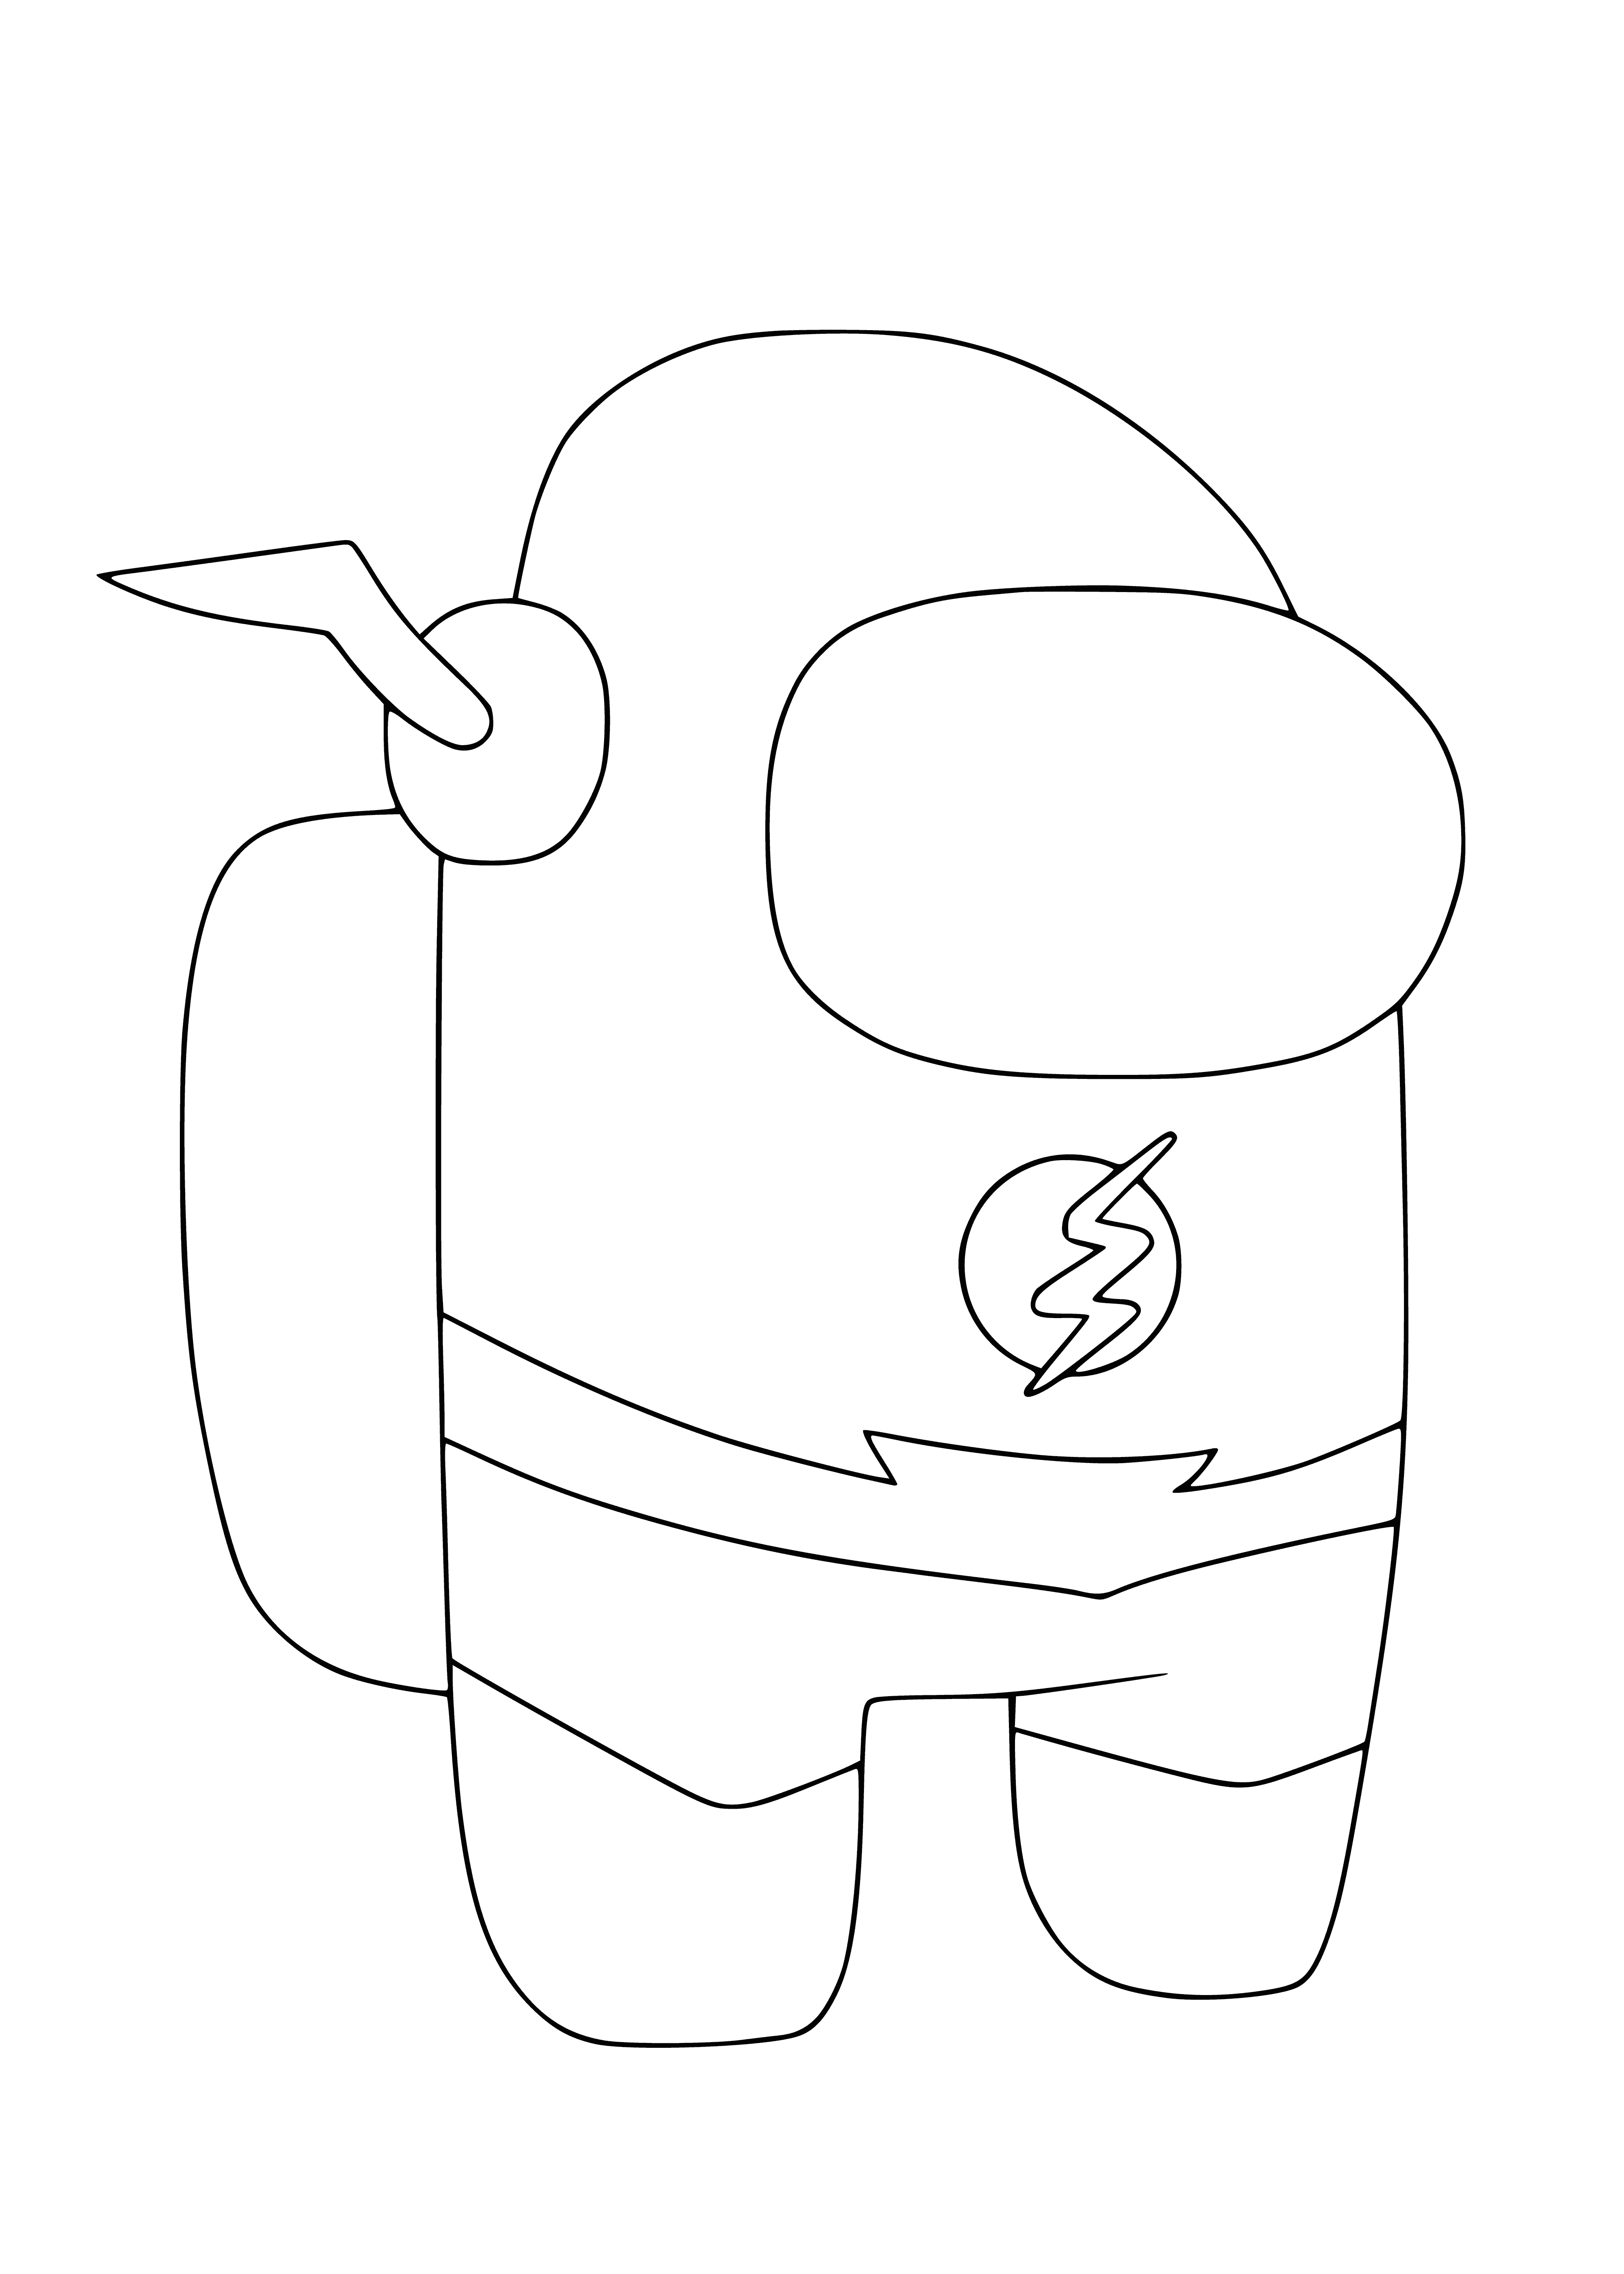 among As coloring page